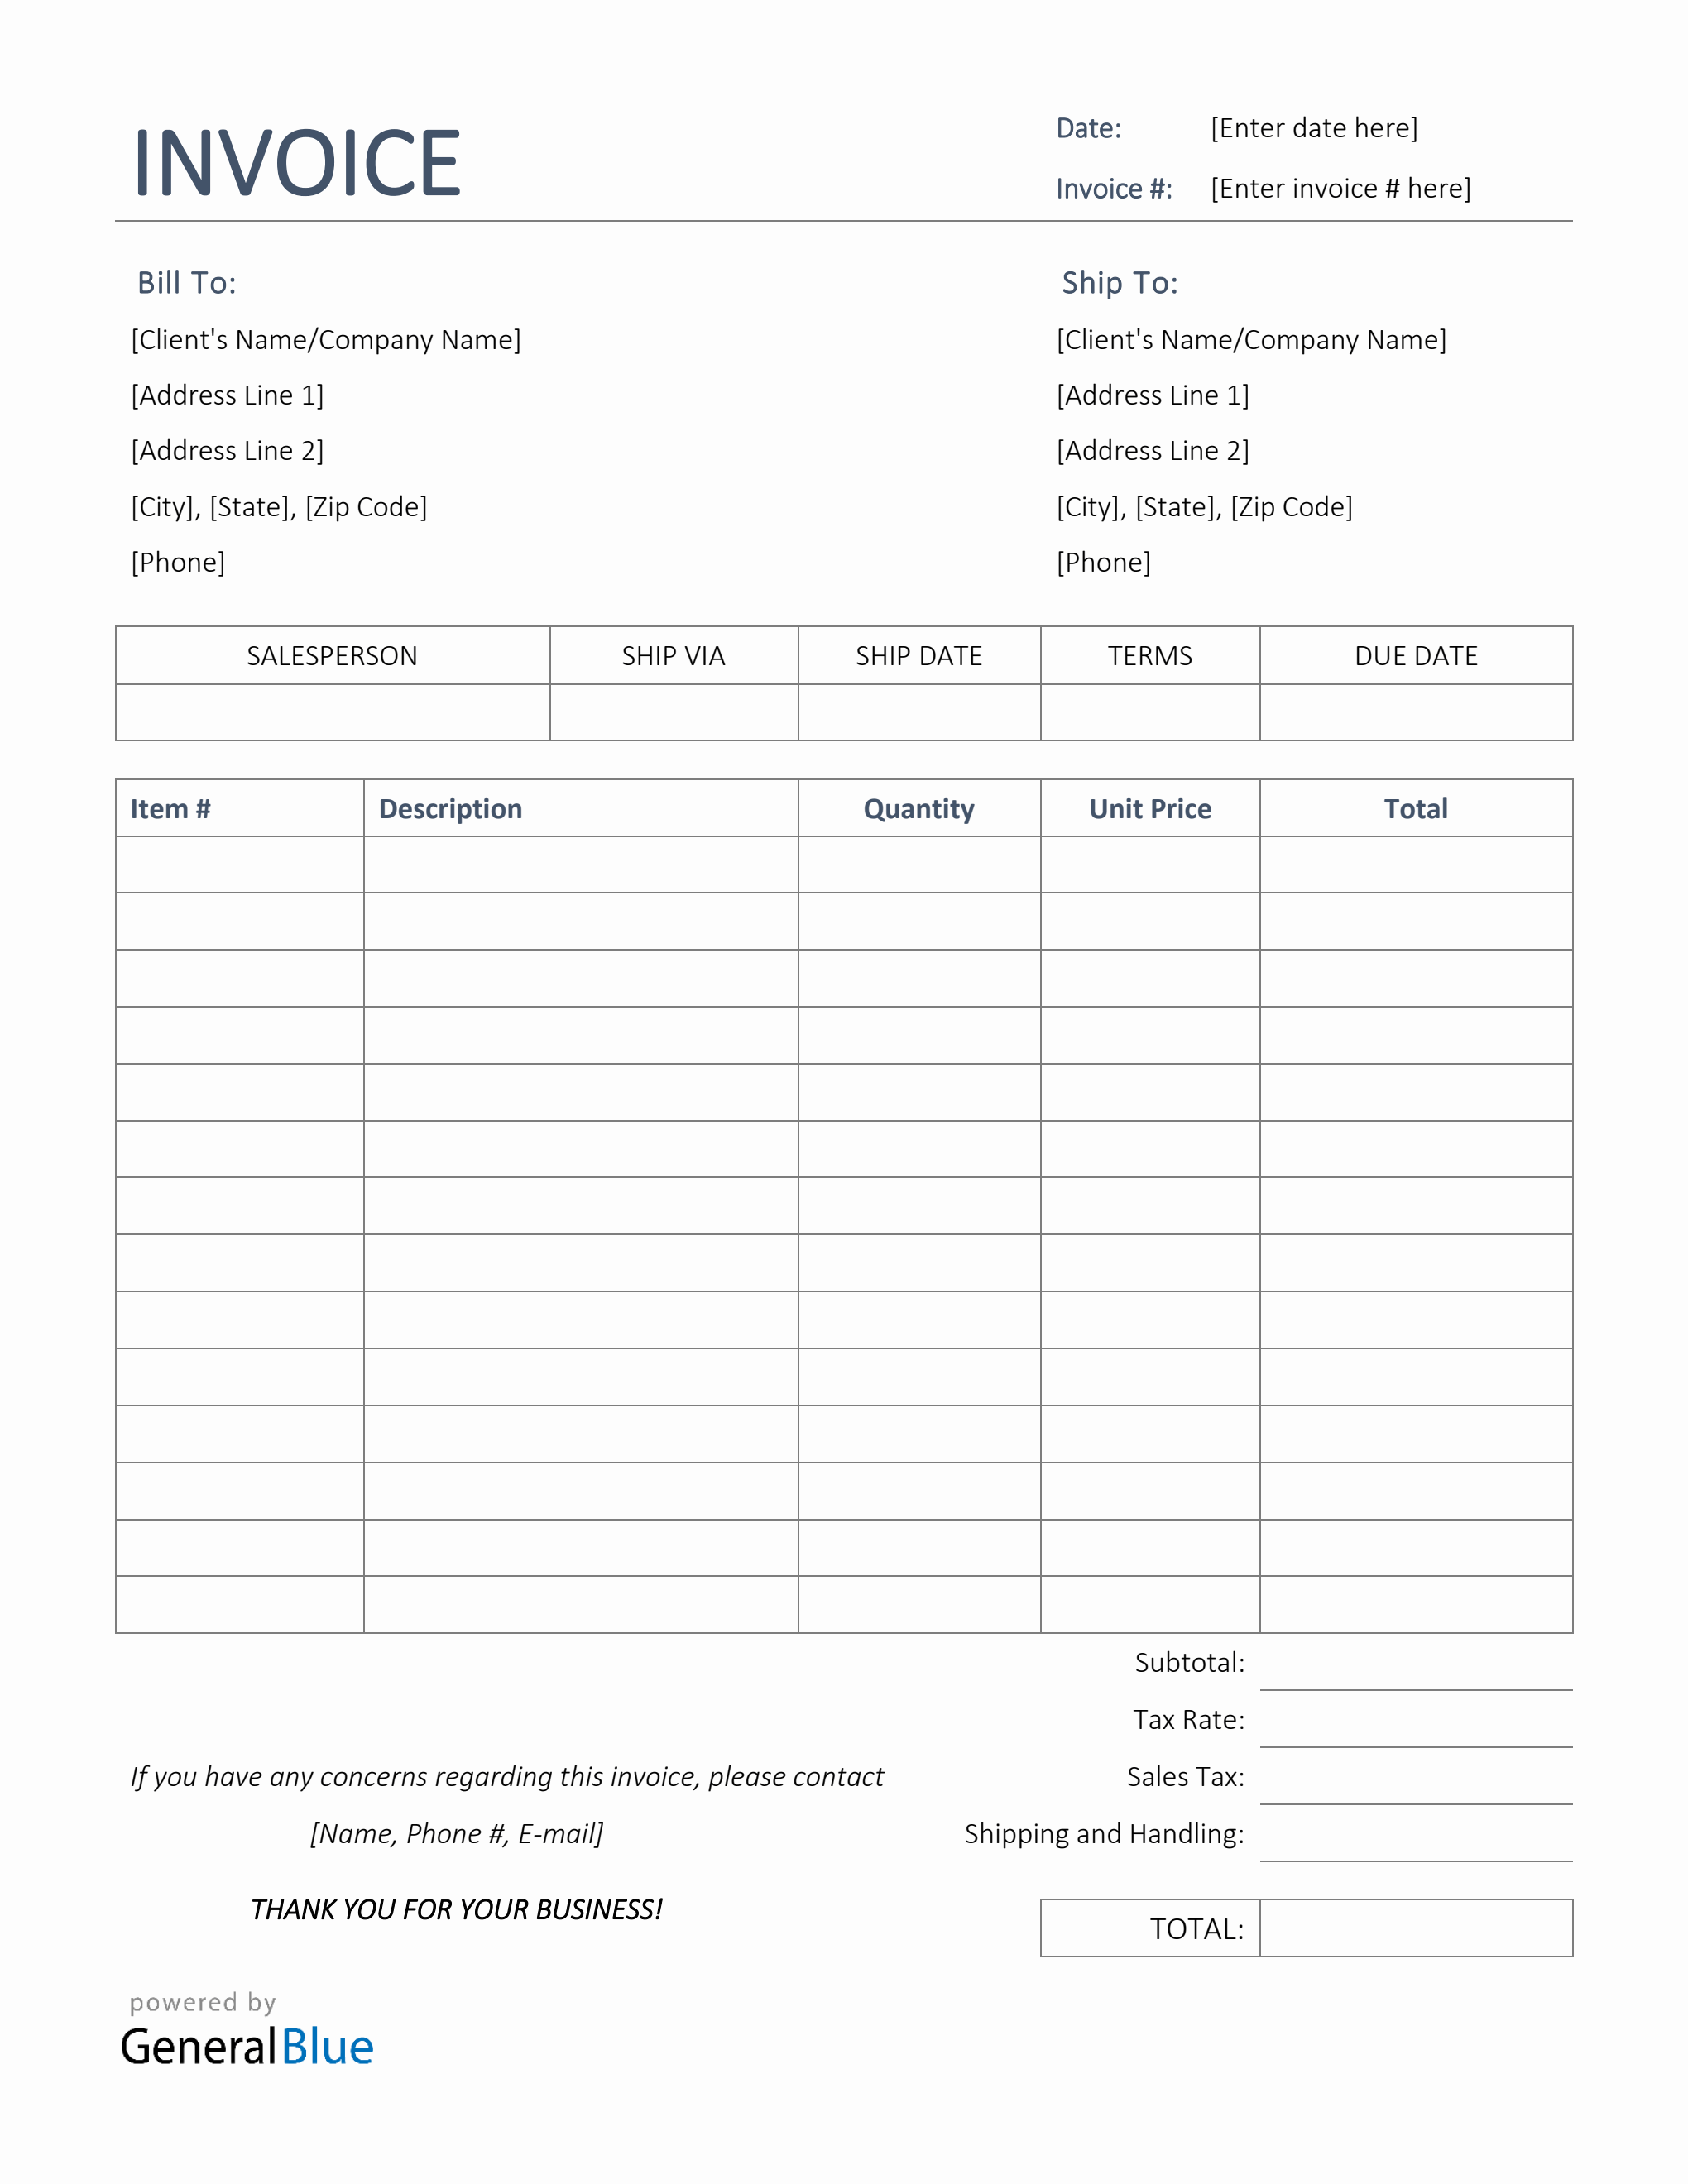 Sales Invoice Template in Word (Simple) Regarding Free Sample Invoice Template Word